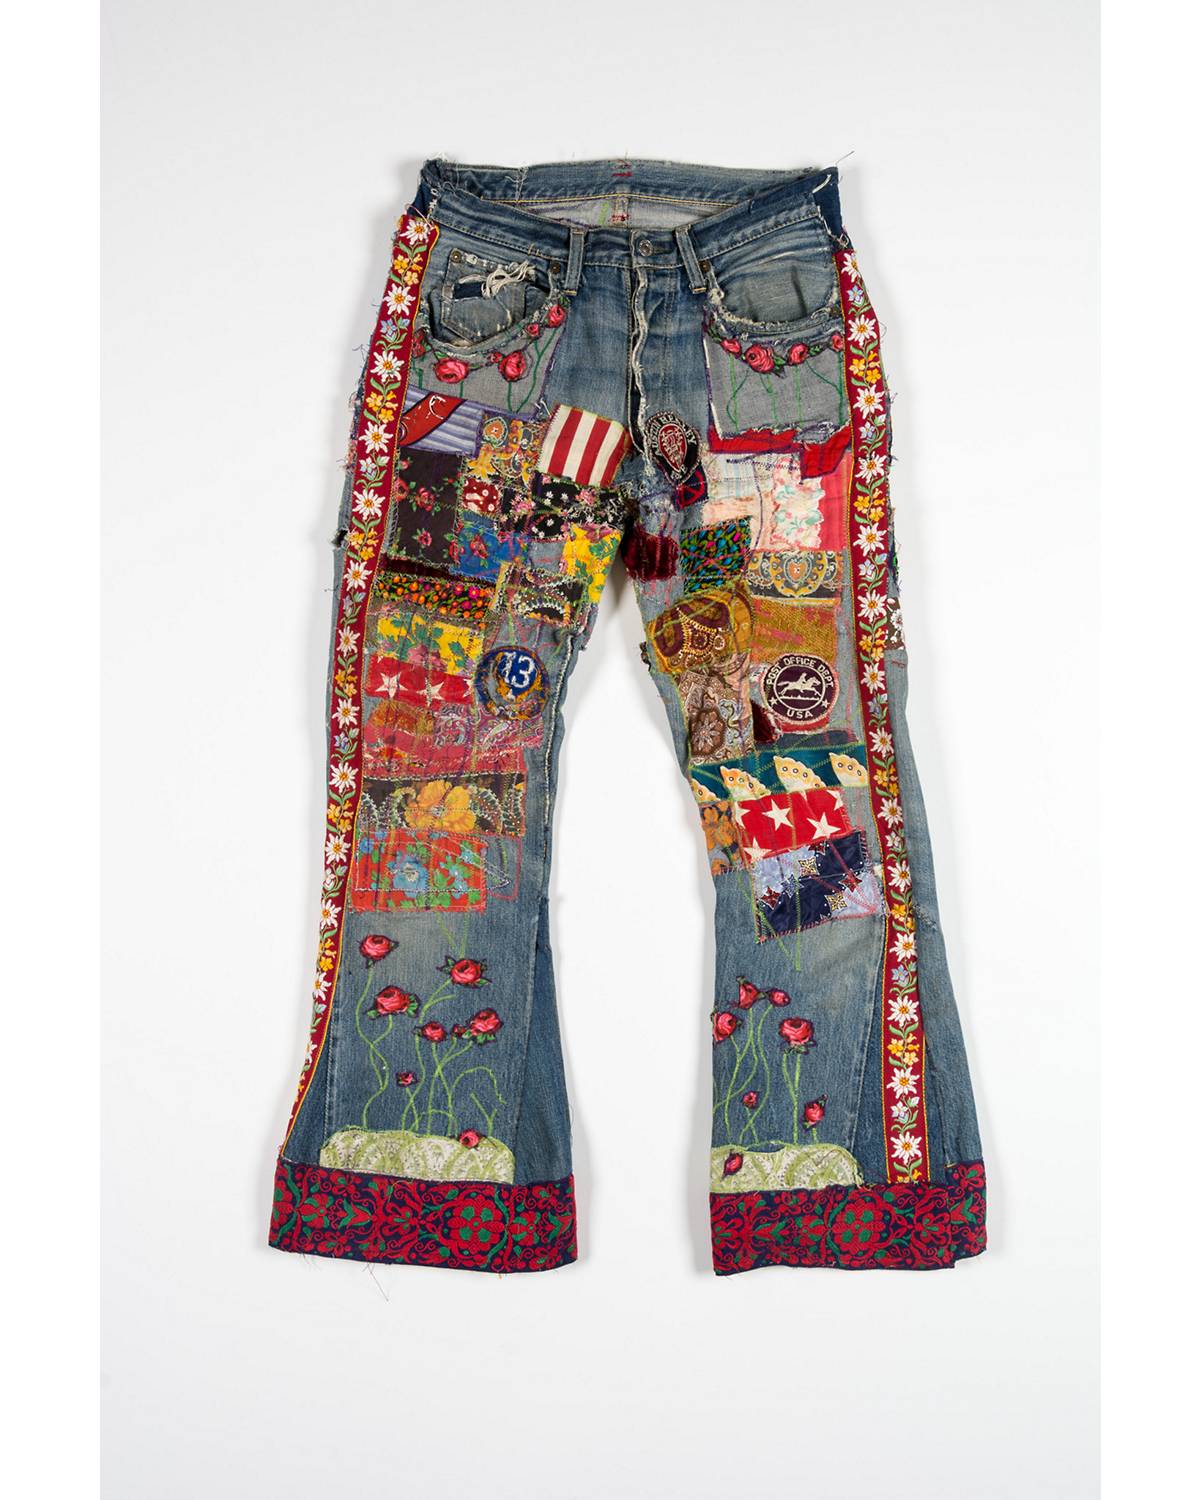 THE IT-JEANS OF THE 1960S